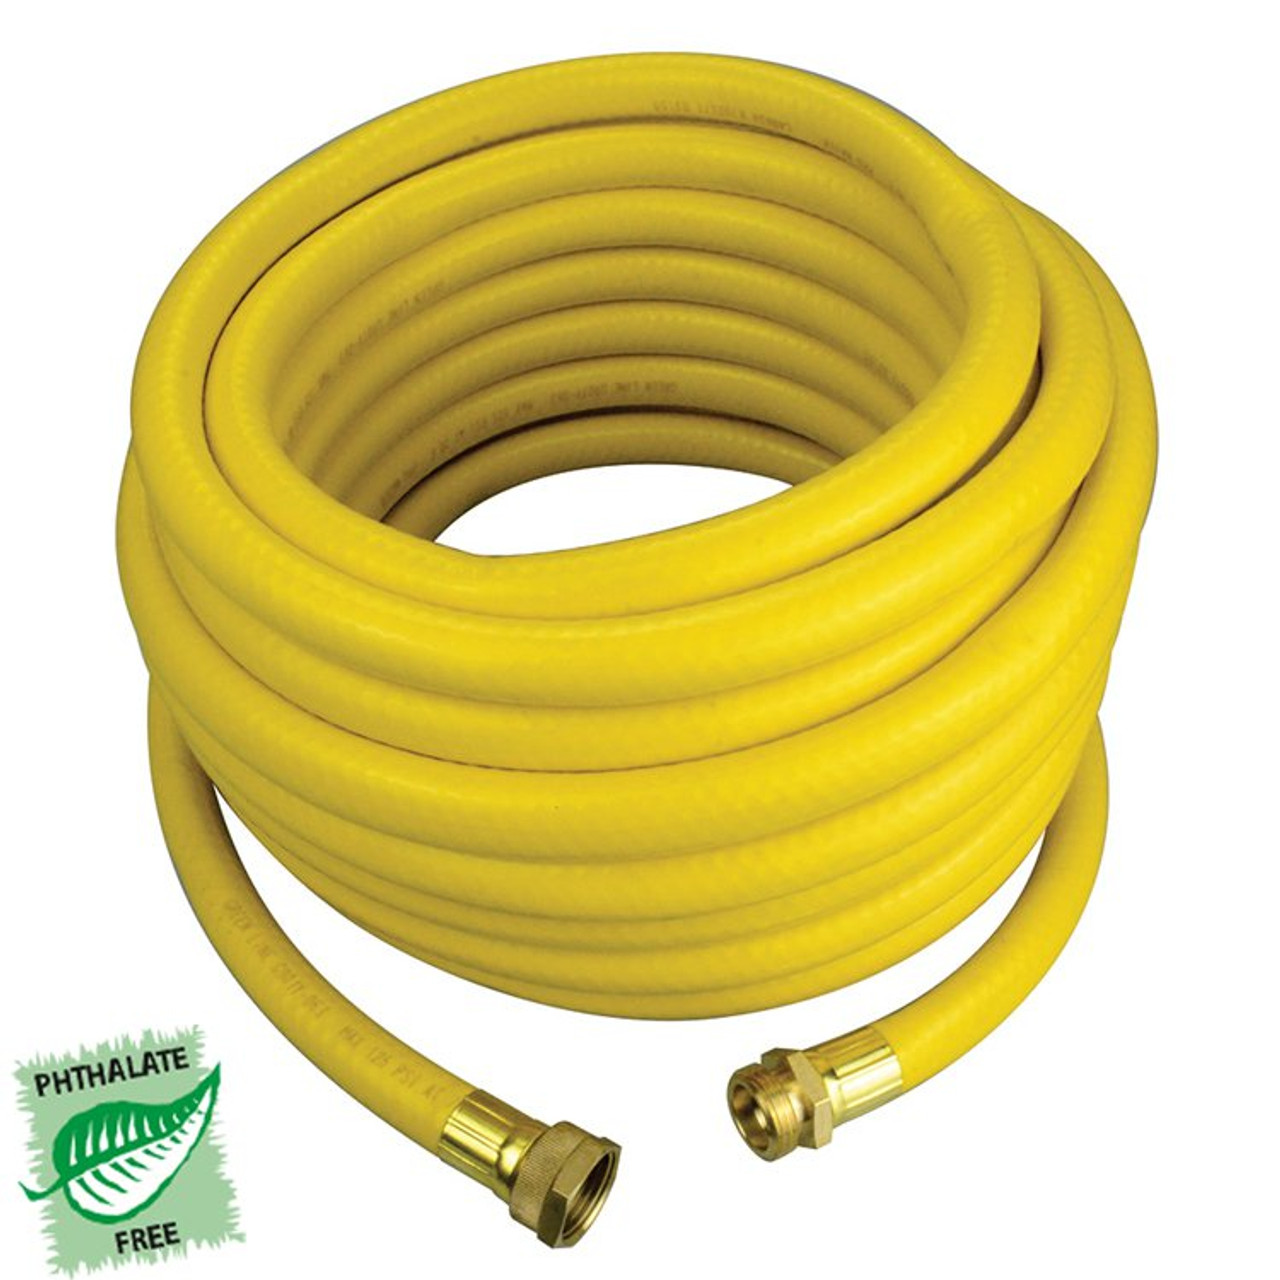 5/8" x 50' Pro Water Hose Assembly   G901Y-063GHT50